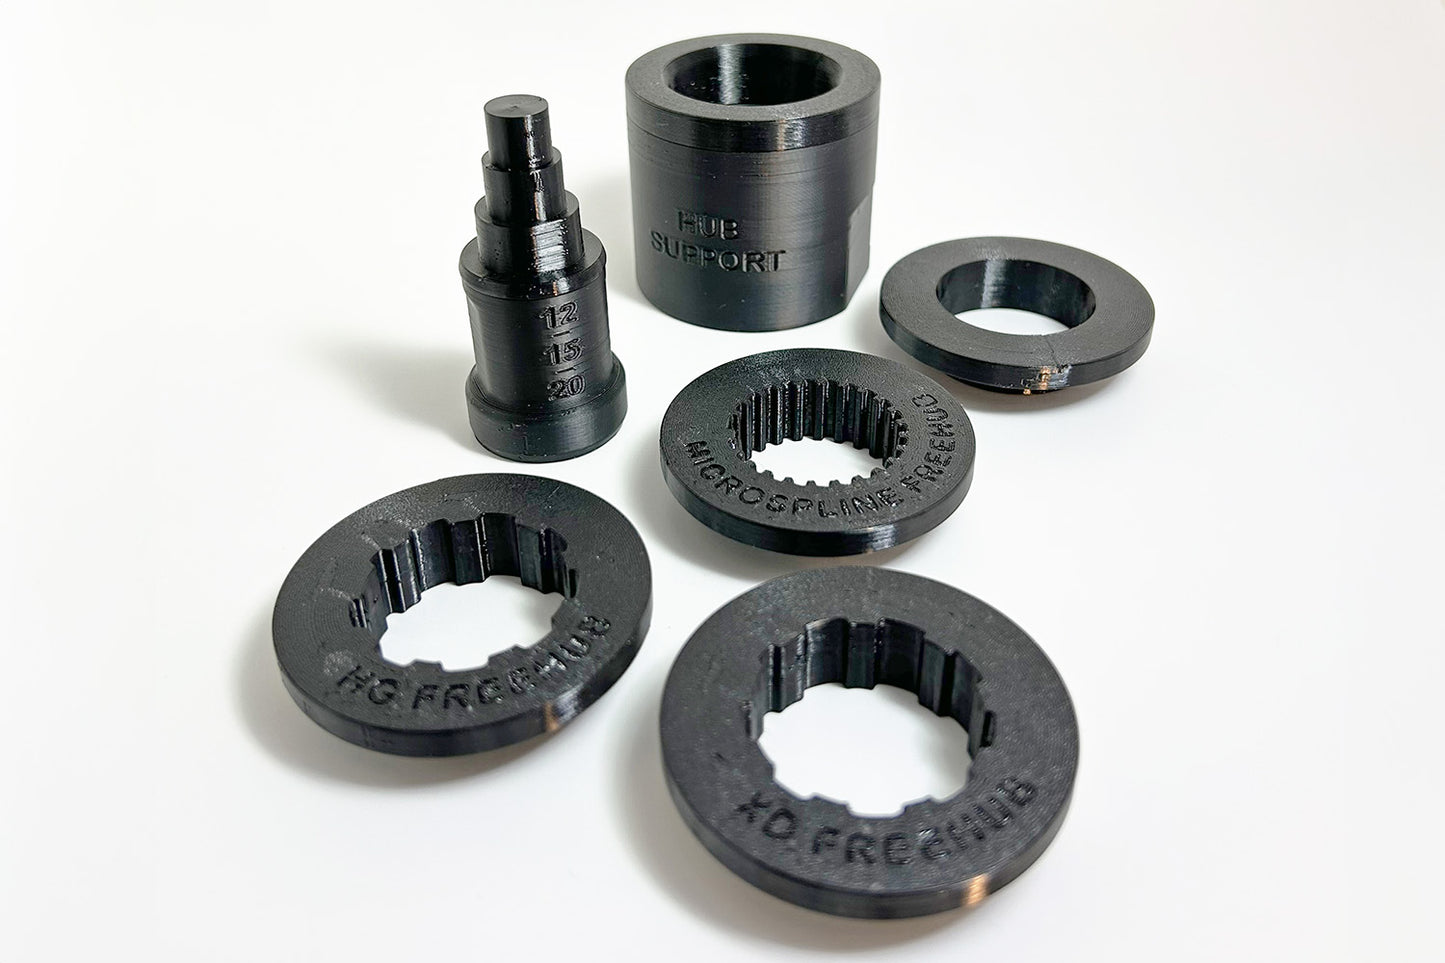 Affordable and high impact resistant 3D printed Wheel Hub Axle Removal Tool, Hub Support and Freehub Adaptors. Made for Home and PRO Mechanics!